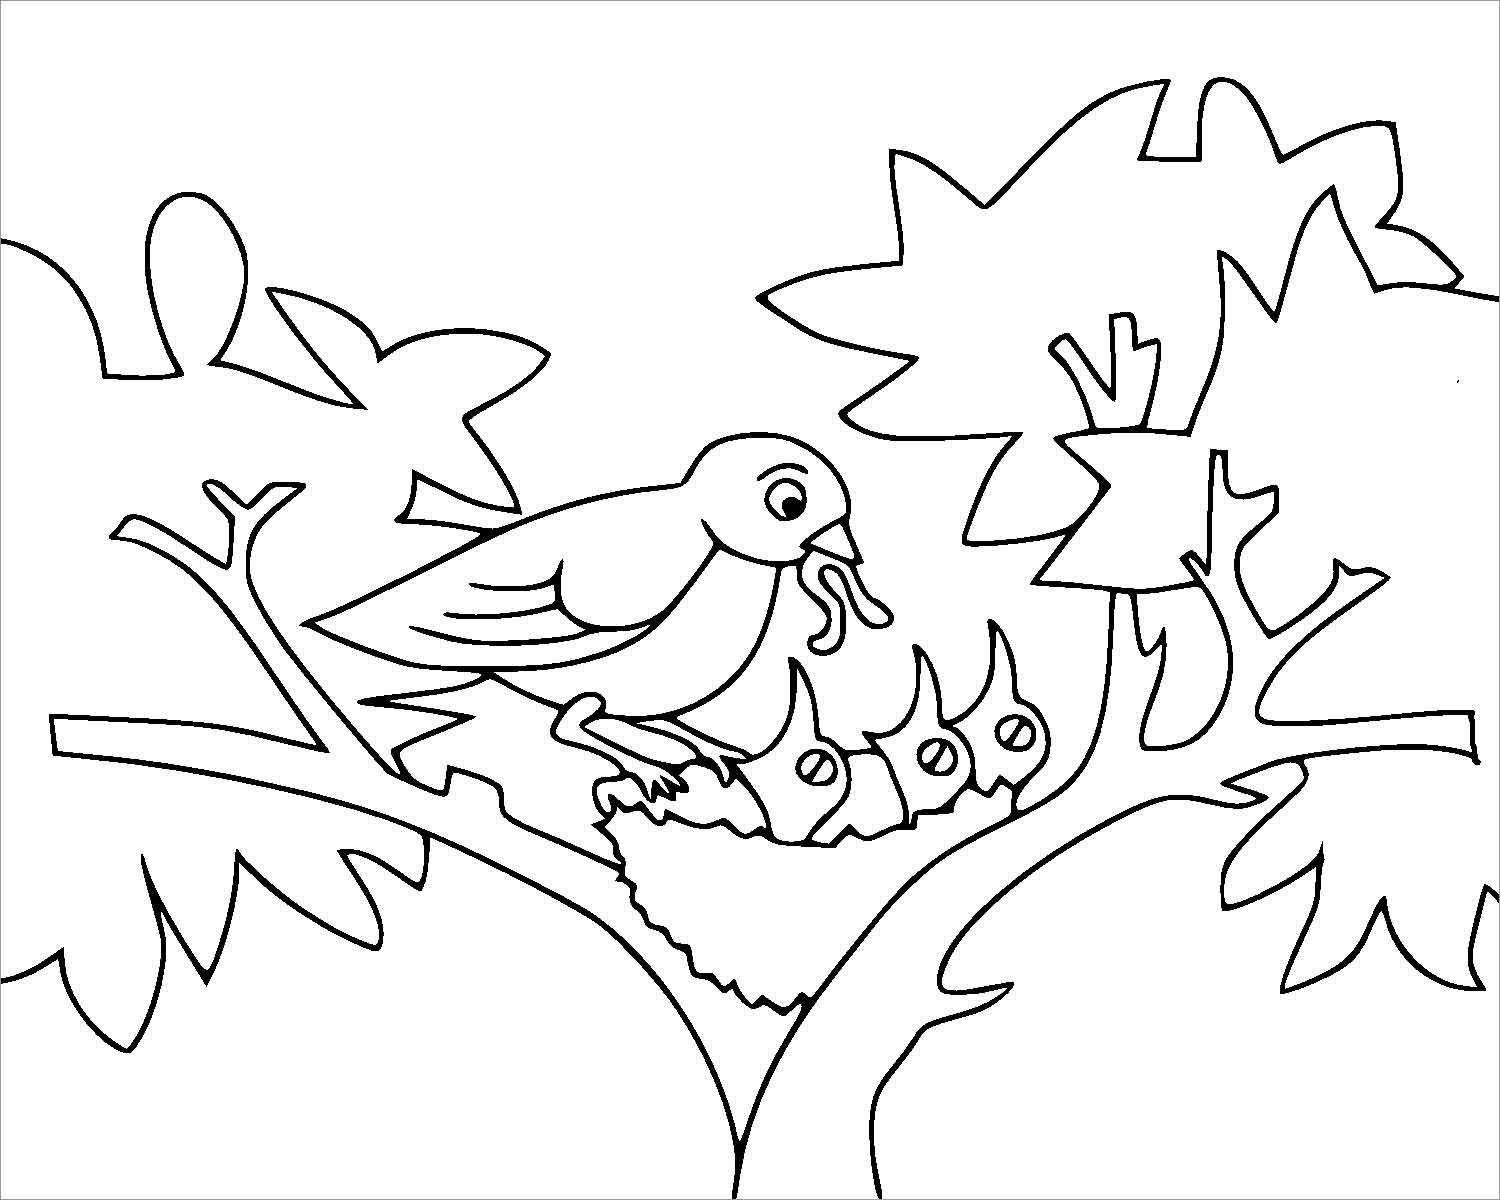 Bird Moms and Baby Lives on Tree Coloring Page